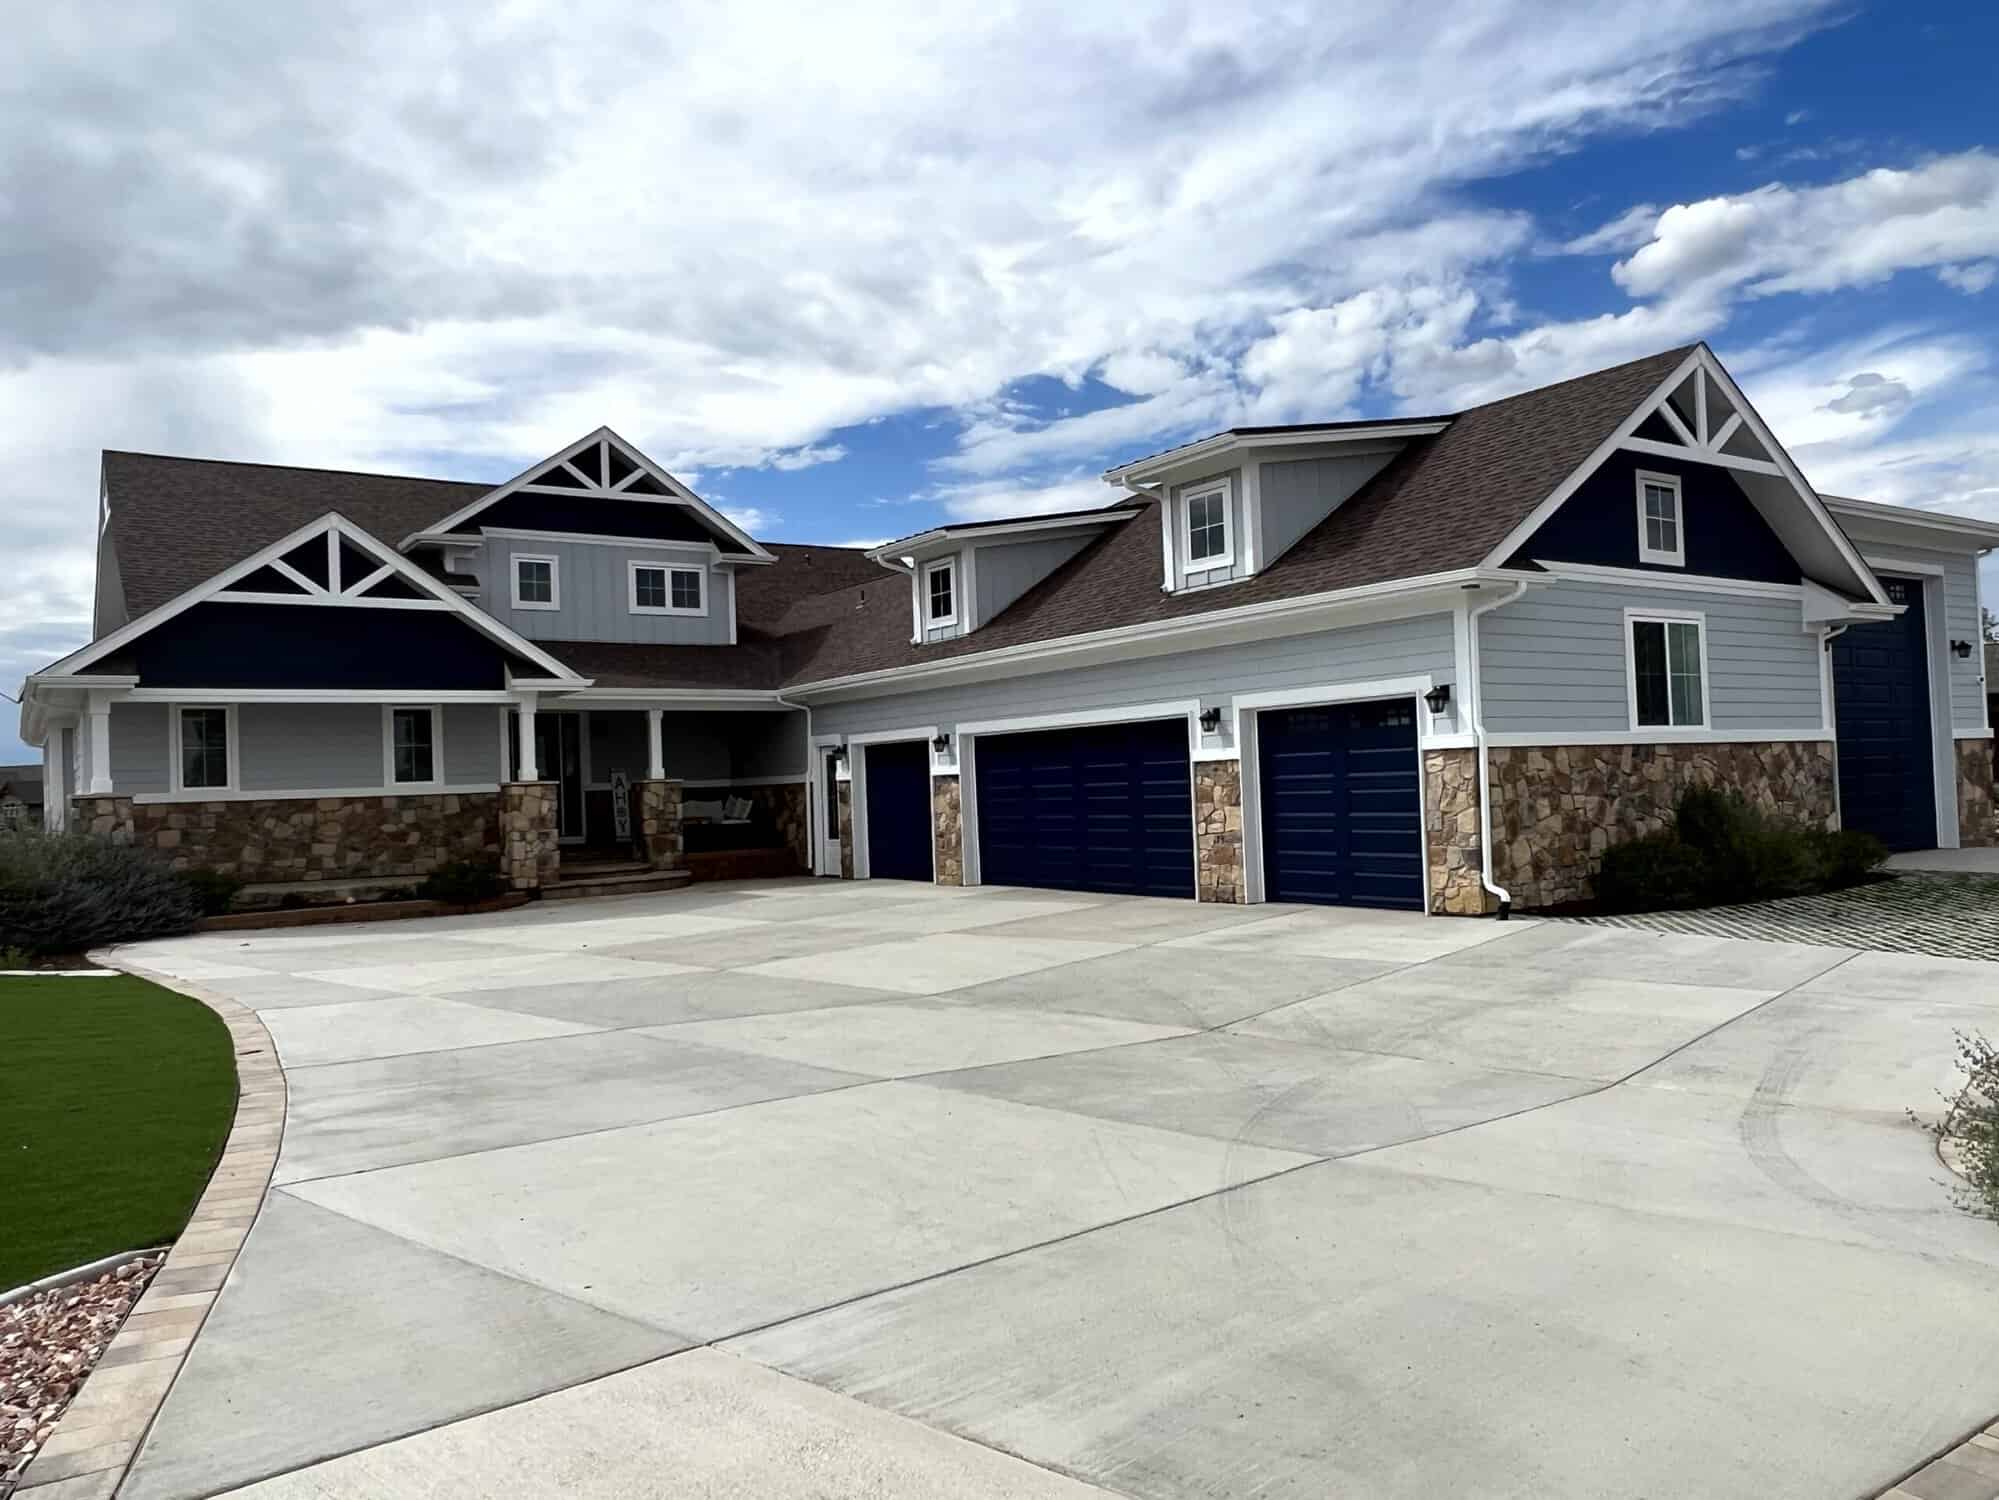 A House Exterior with Law and Driveway- Exterior House Painting Services in Erie, CO